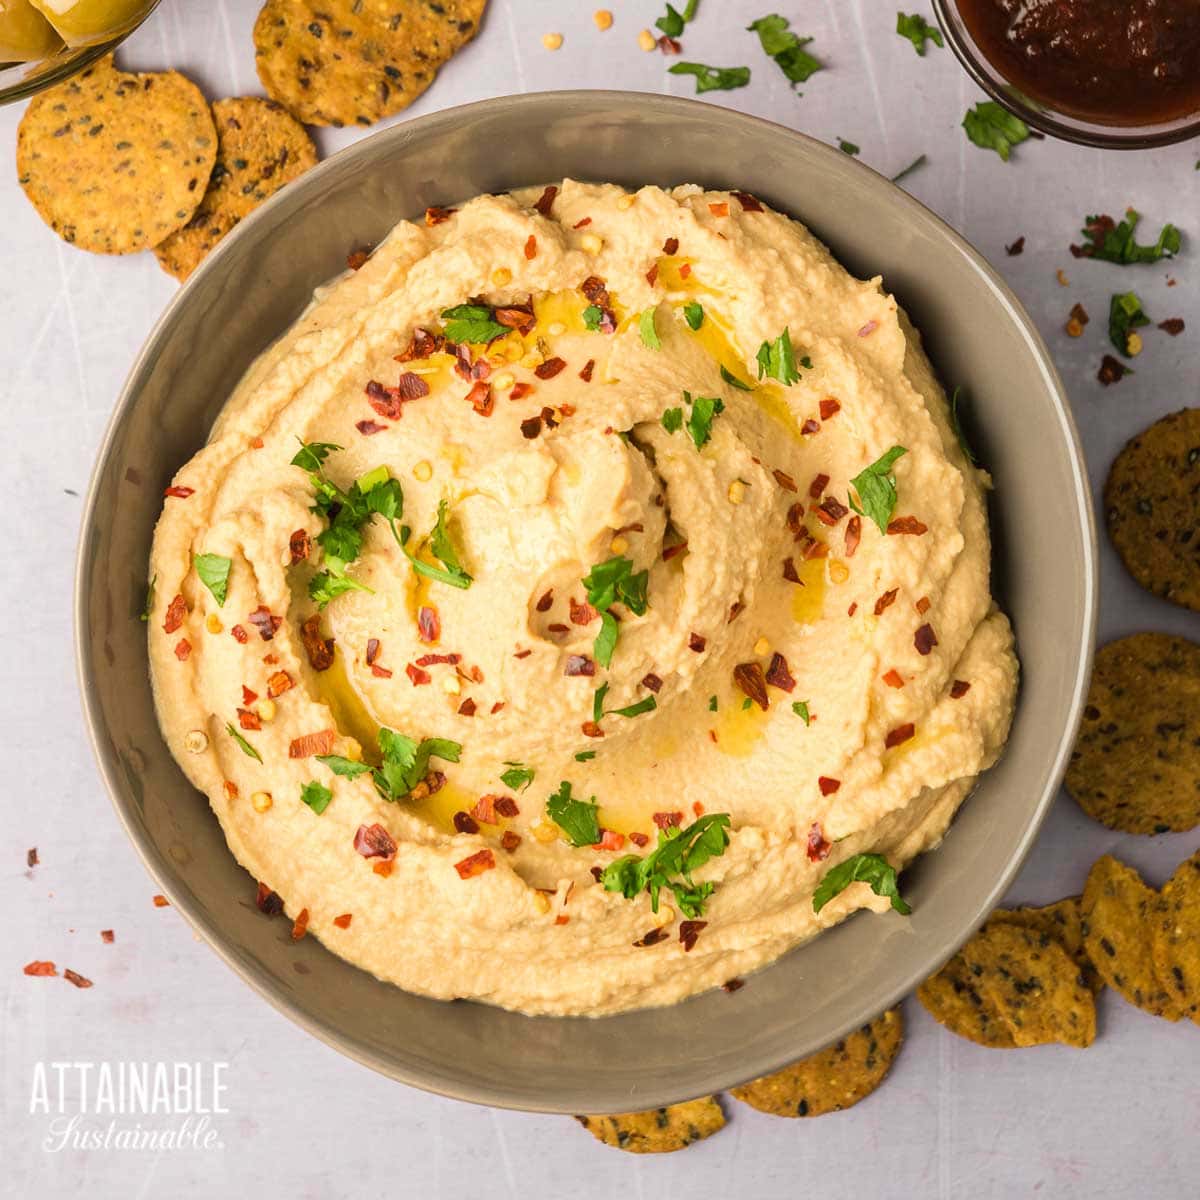 bowl of spicy hummus from above.